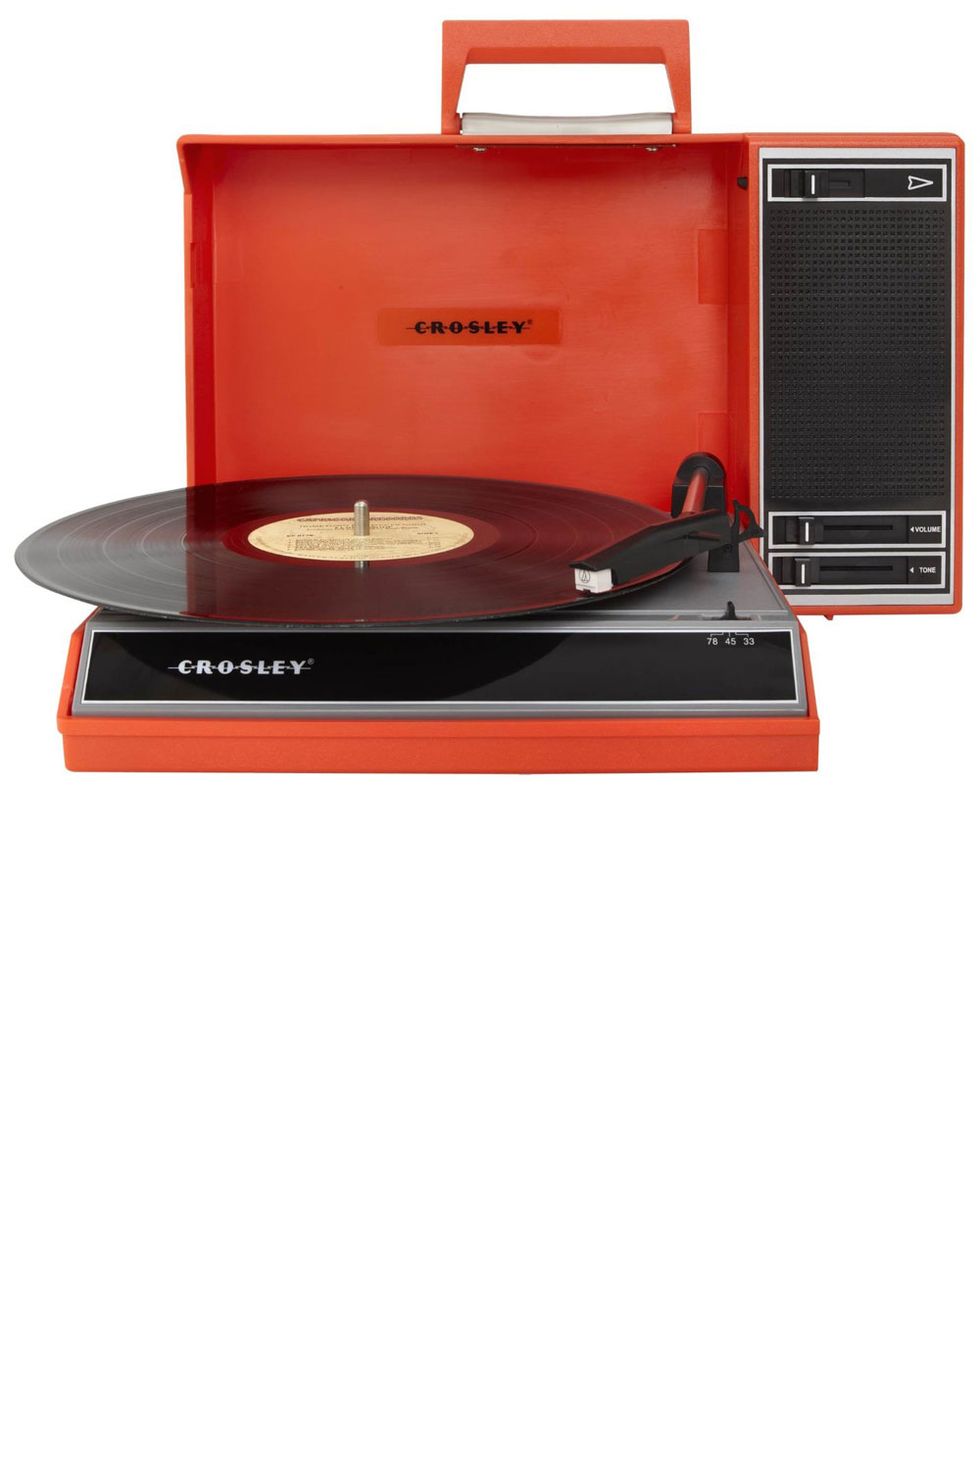 <p><strong>Crosley</strong> turntable, $149.95, <a href="http://www.crosleyradio.com/turntables/product-details?productkey=CR6016A&model=CR6016A-RE" target="_blank">crosleyradio.com</a>.</p>